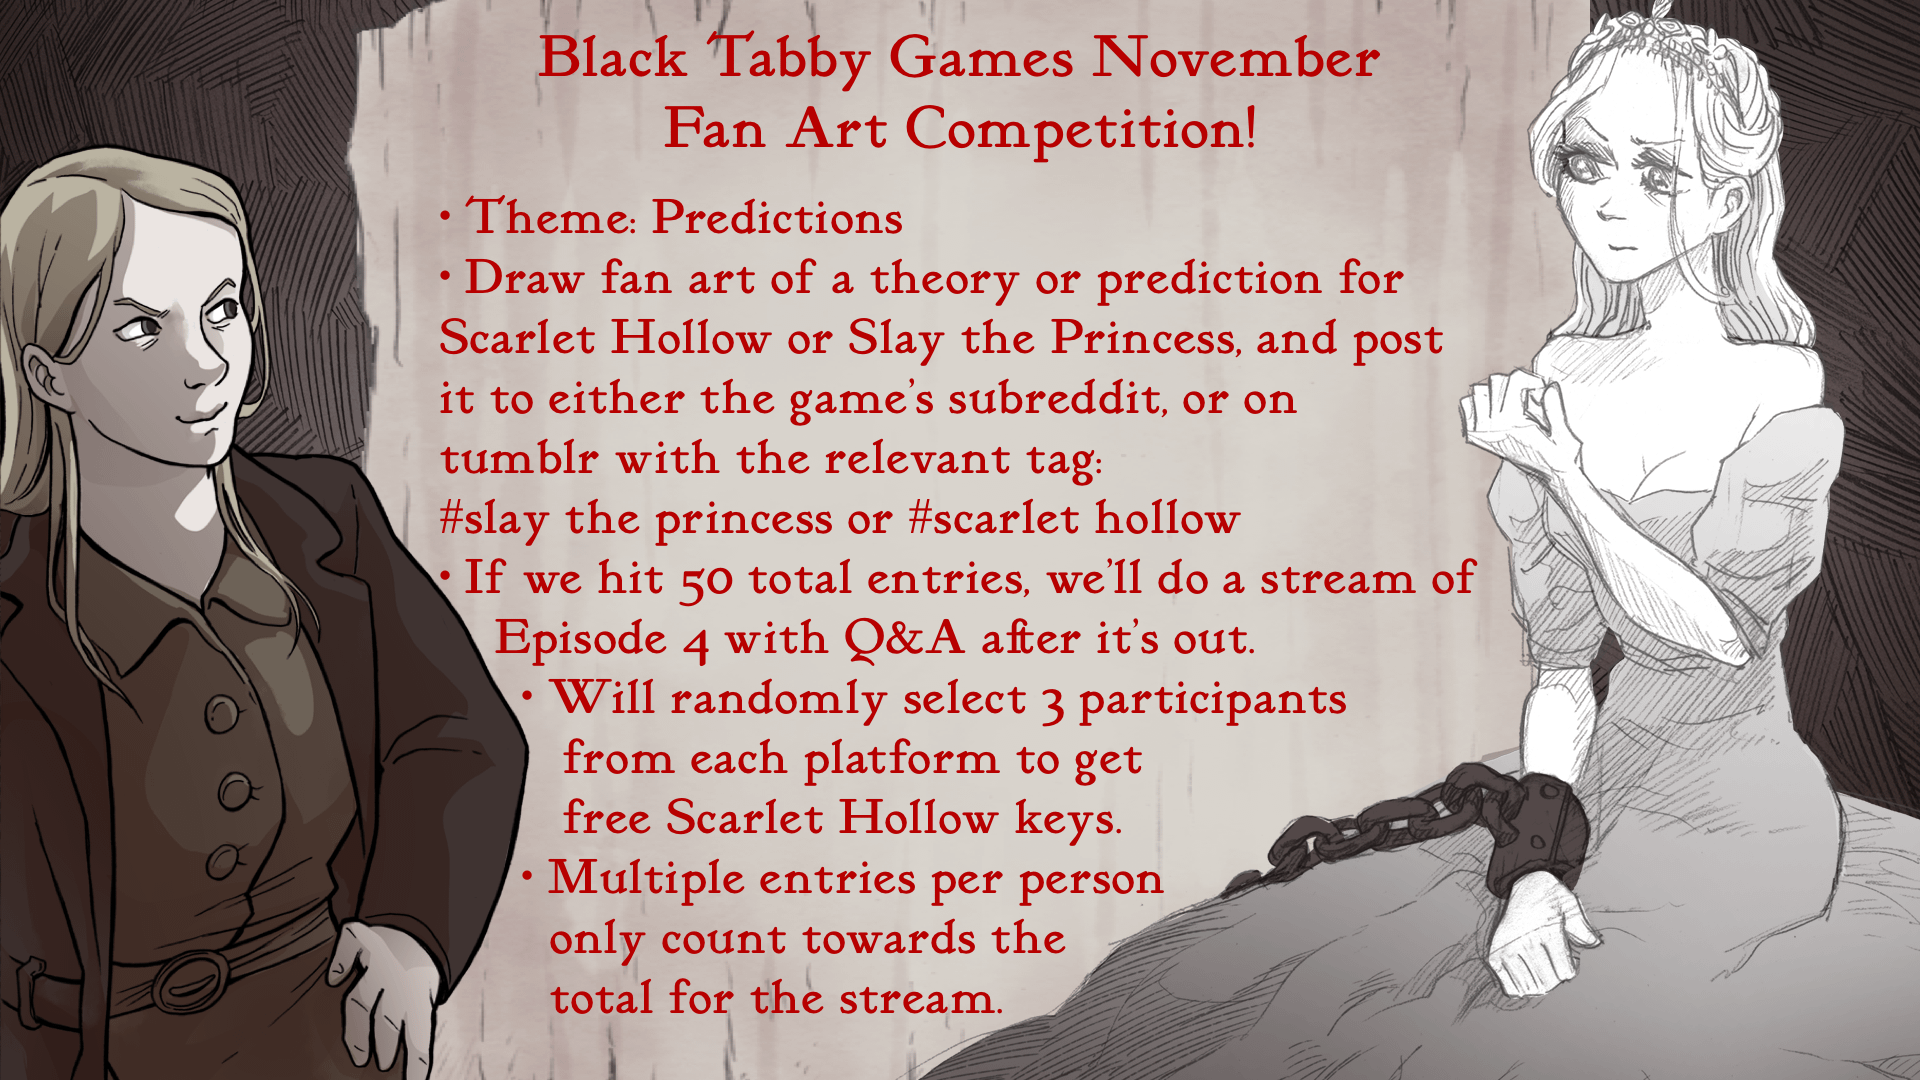 Slay the Princess and Scarlet Hollow fan art competition!